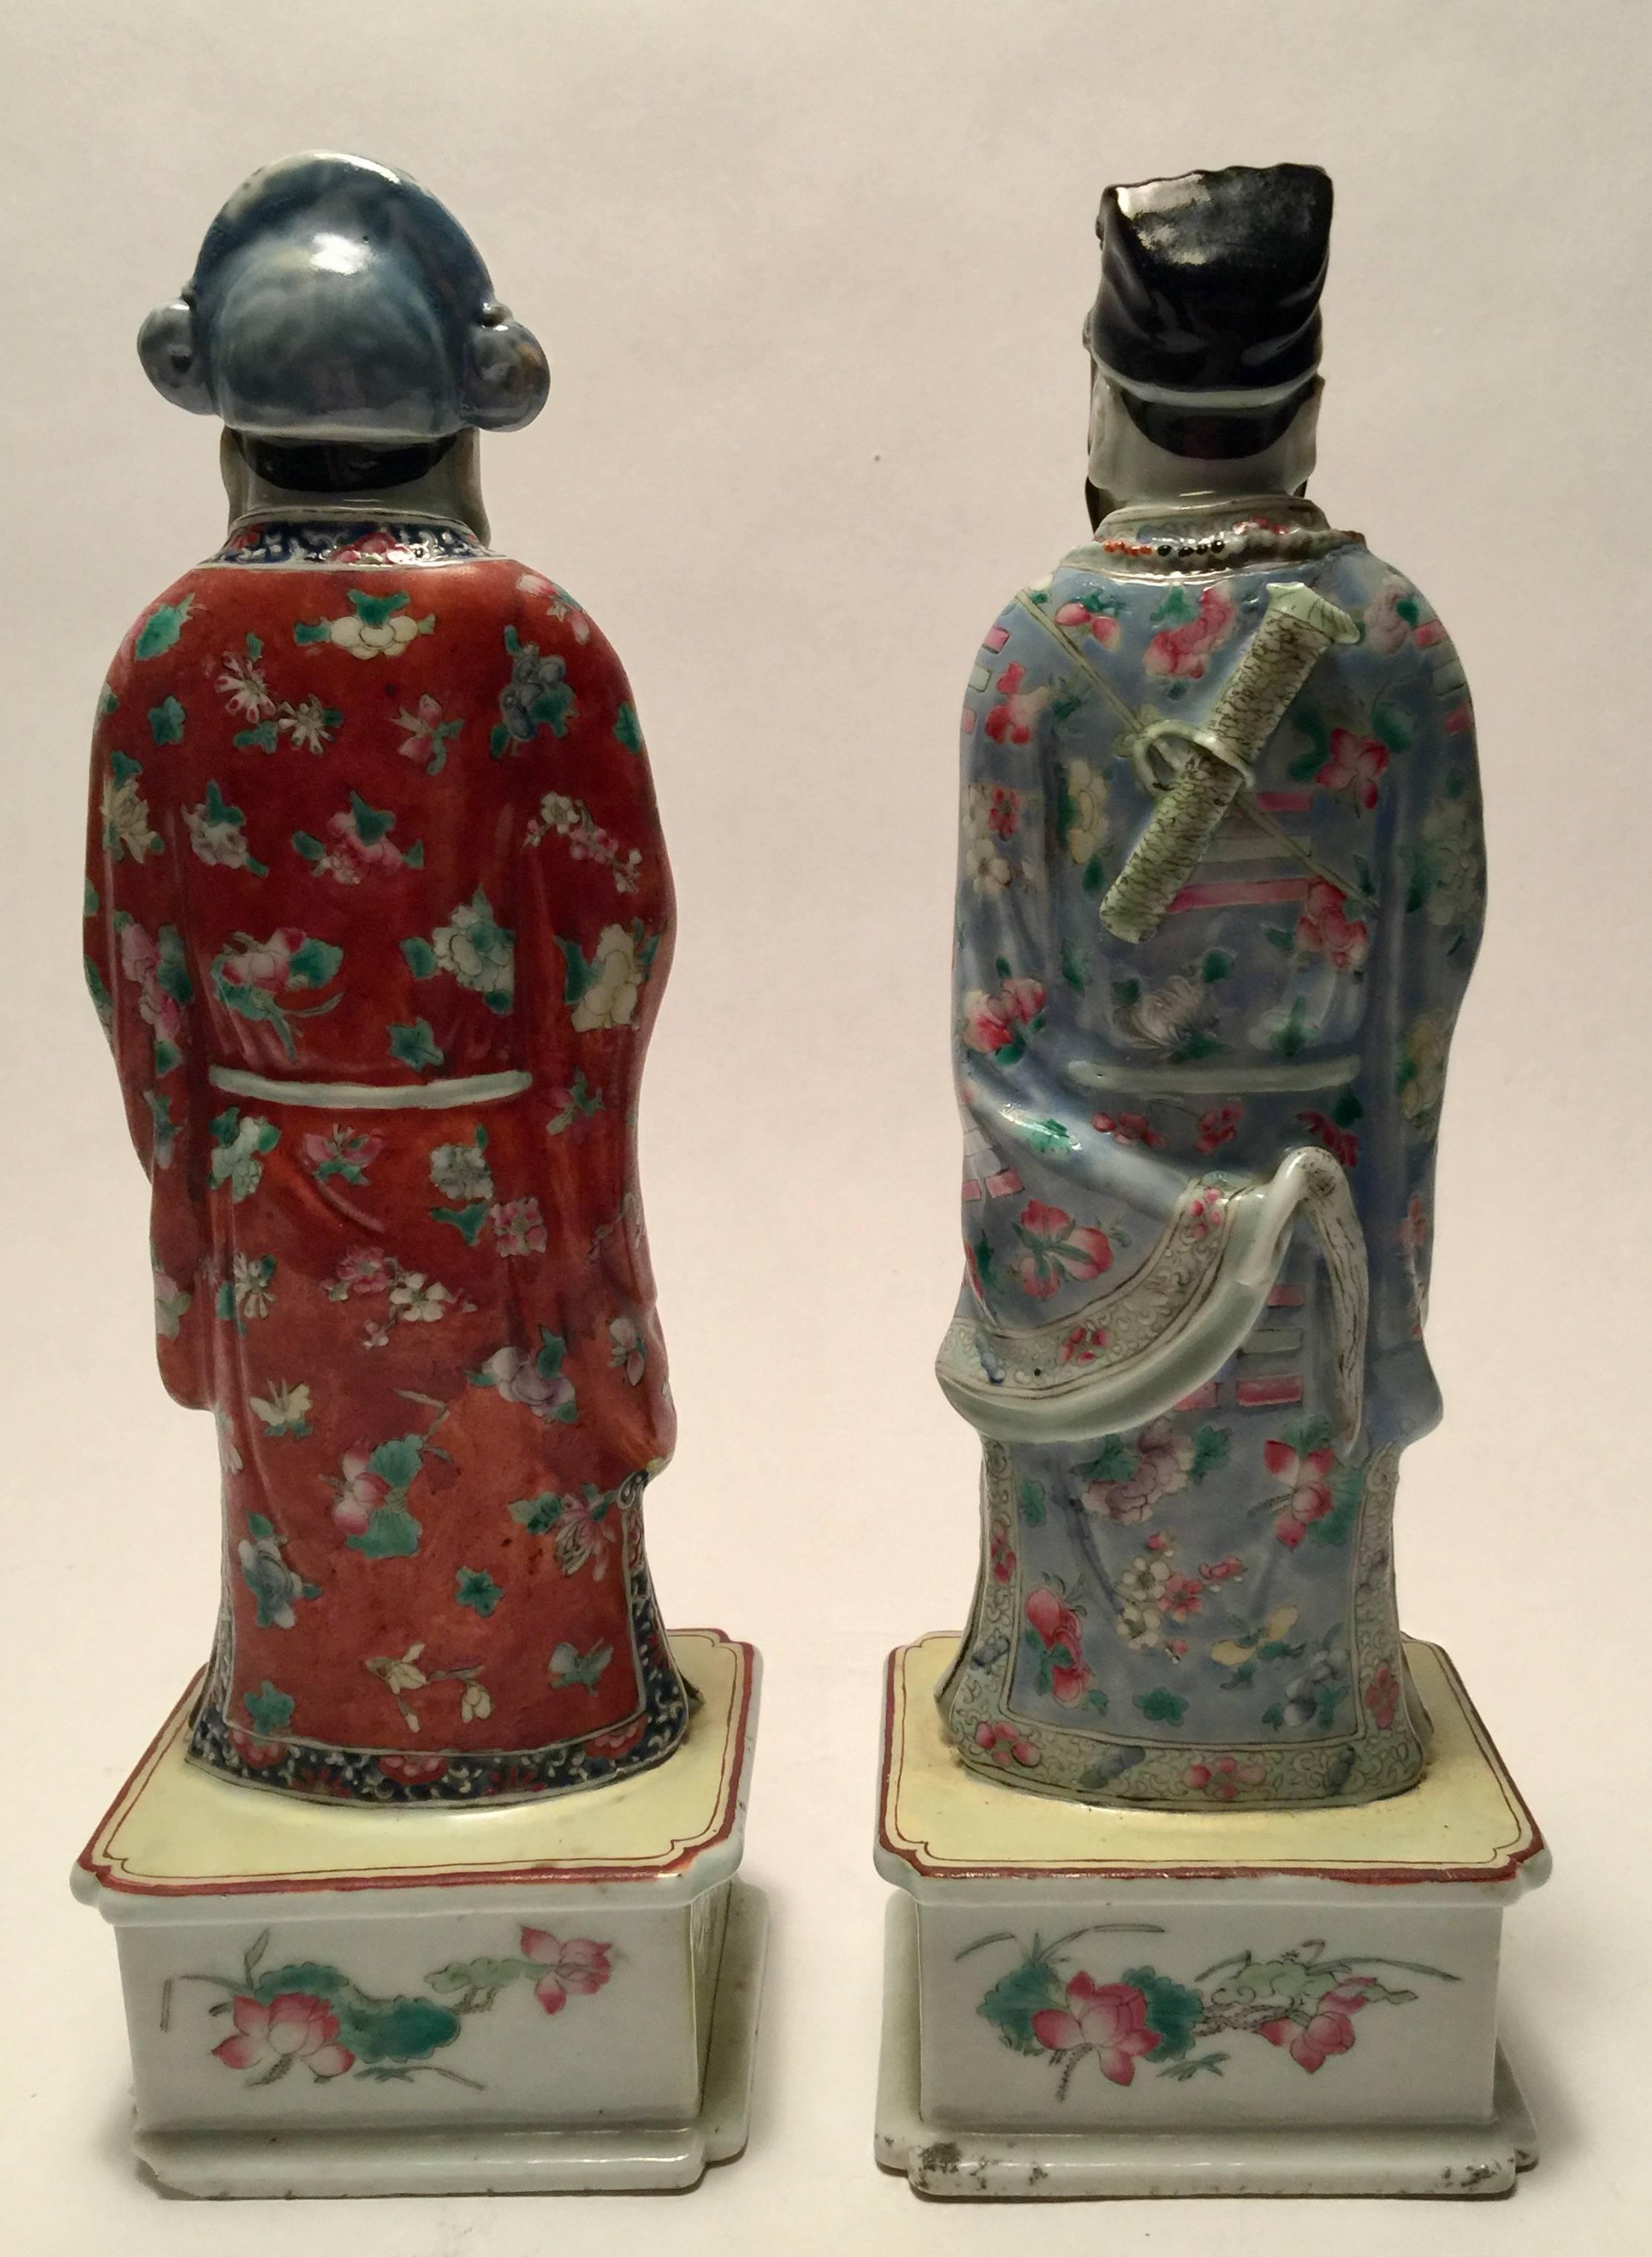 Hand-Painted Pair of Porcelain Chinese Philosopher Statues, 18th Century